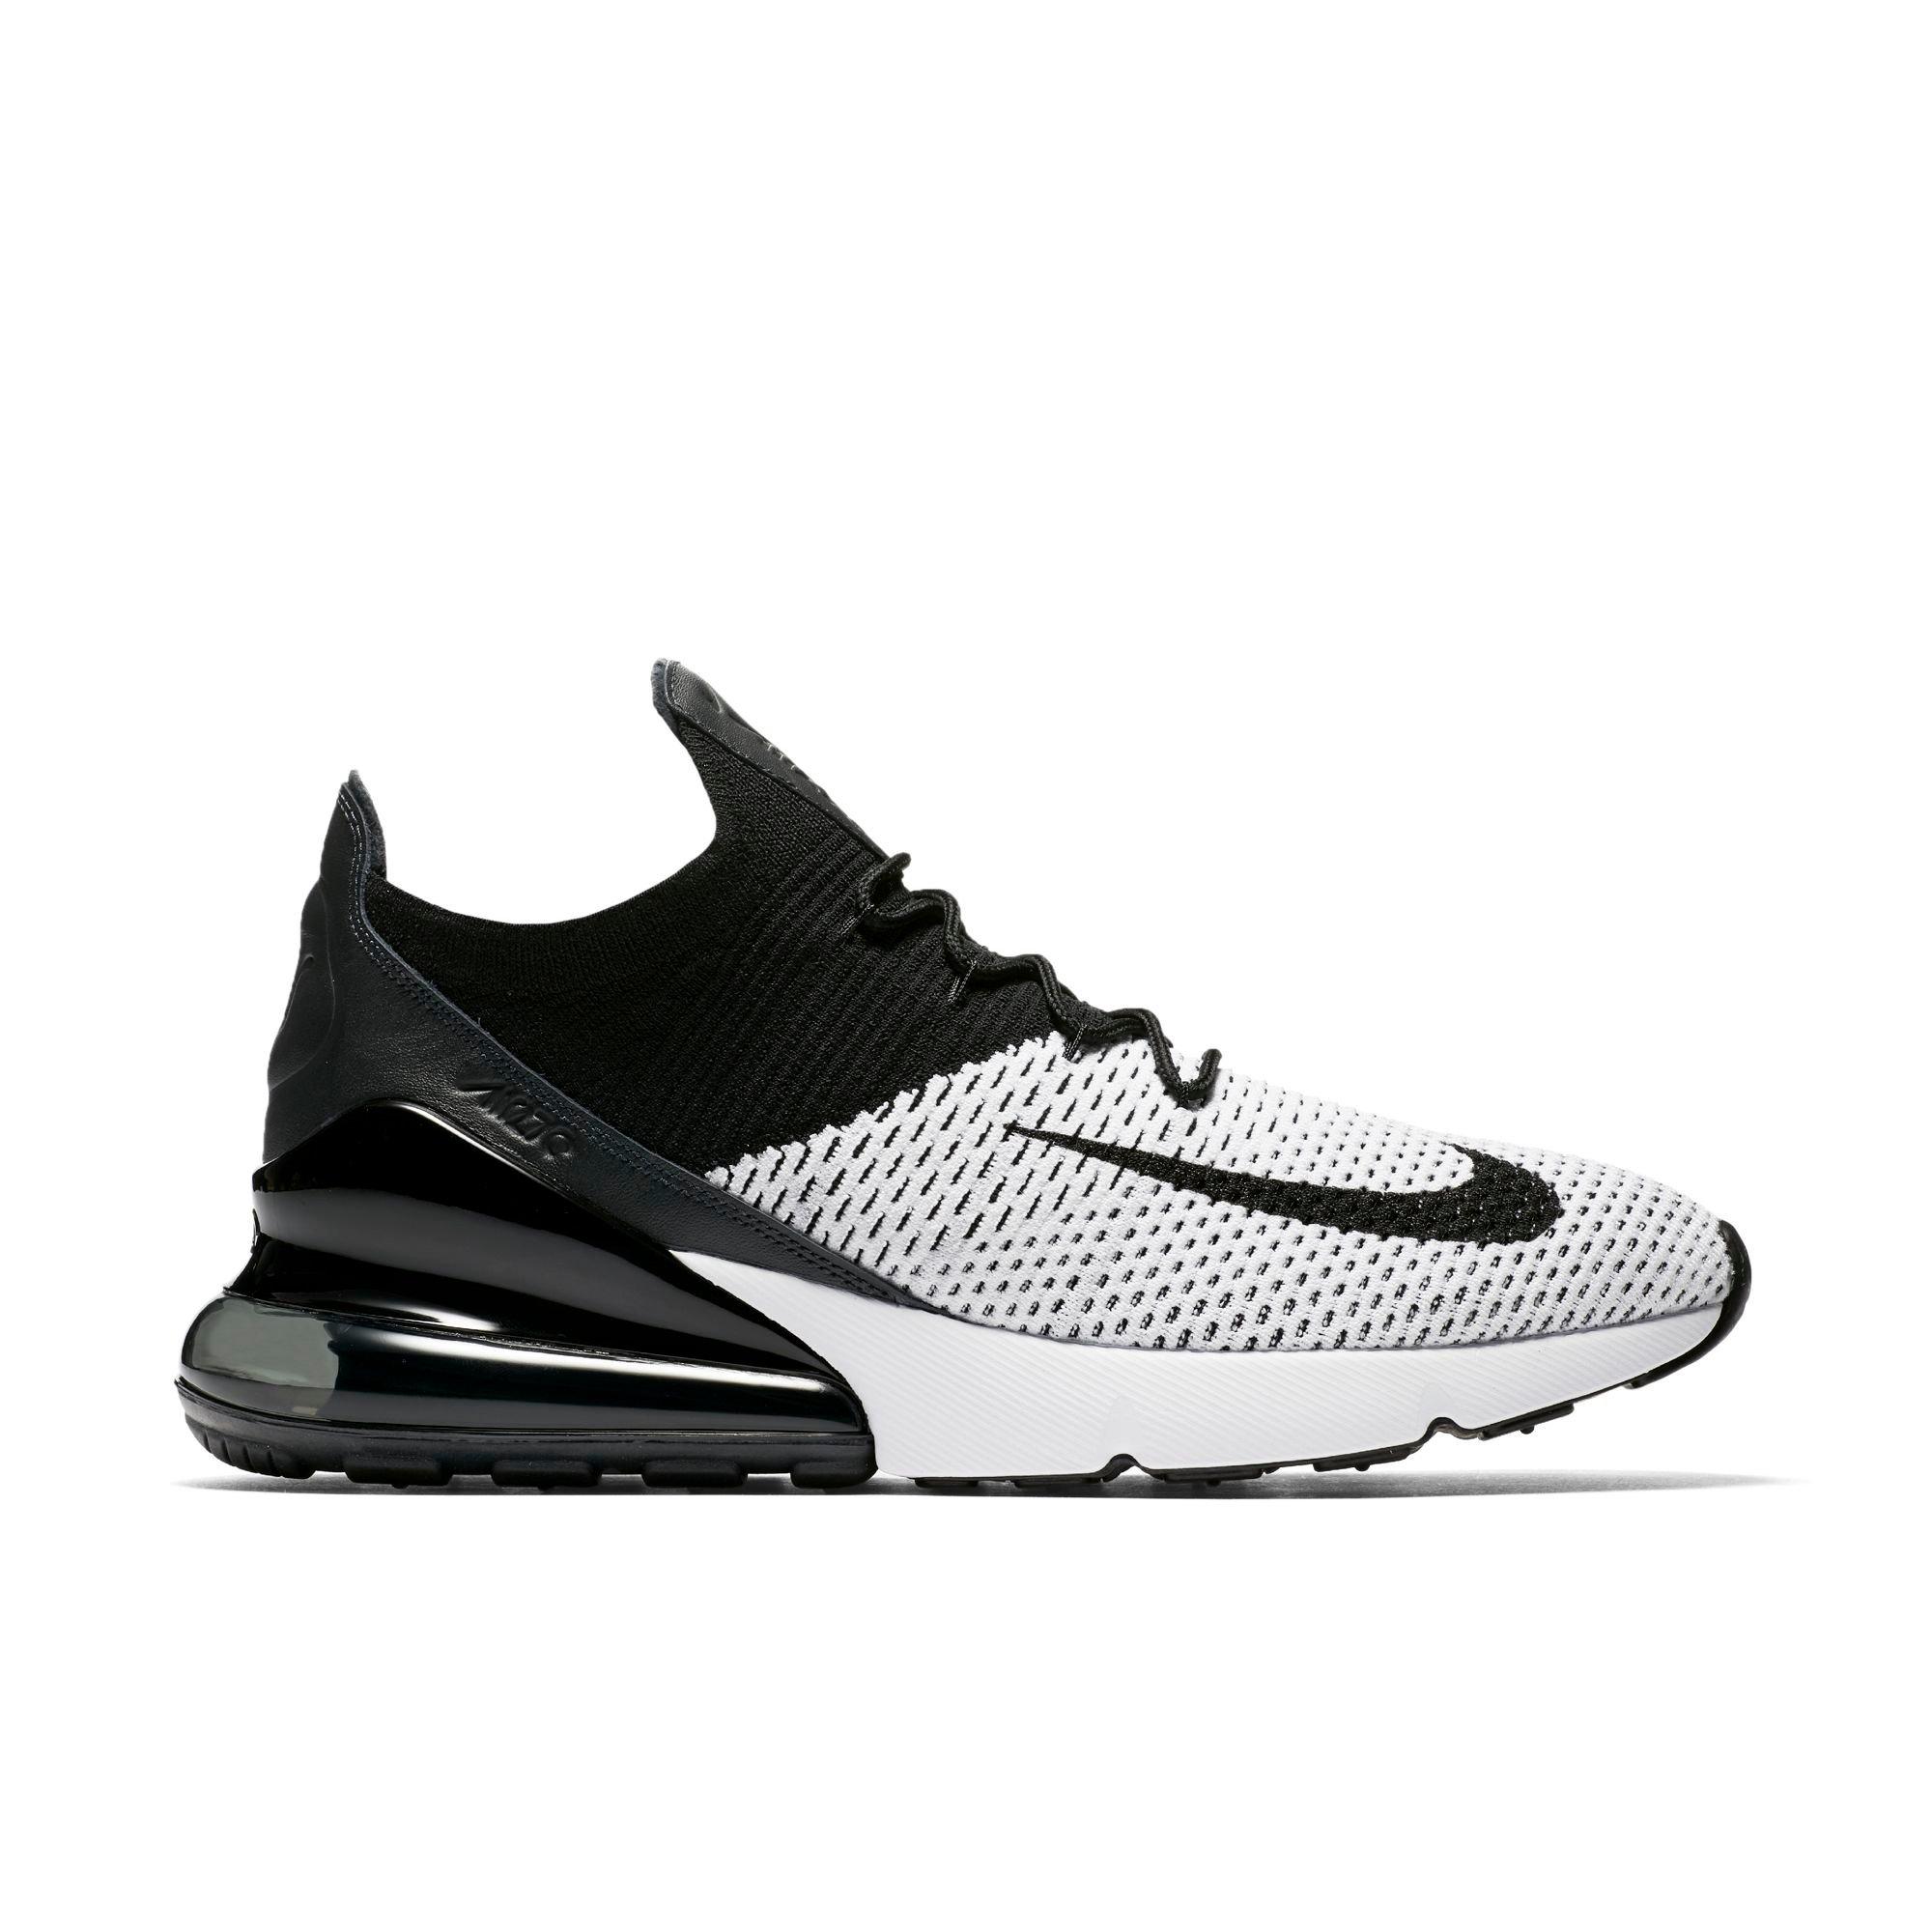 nike 270 flyknit black and white